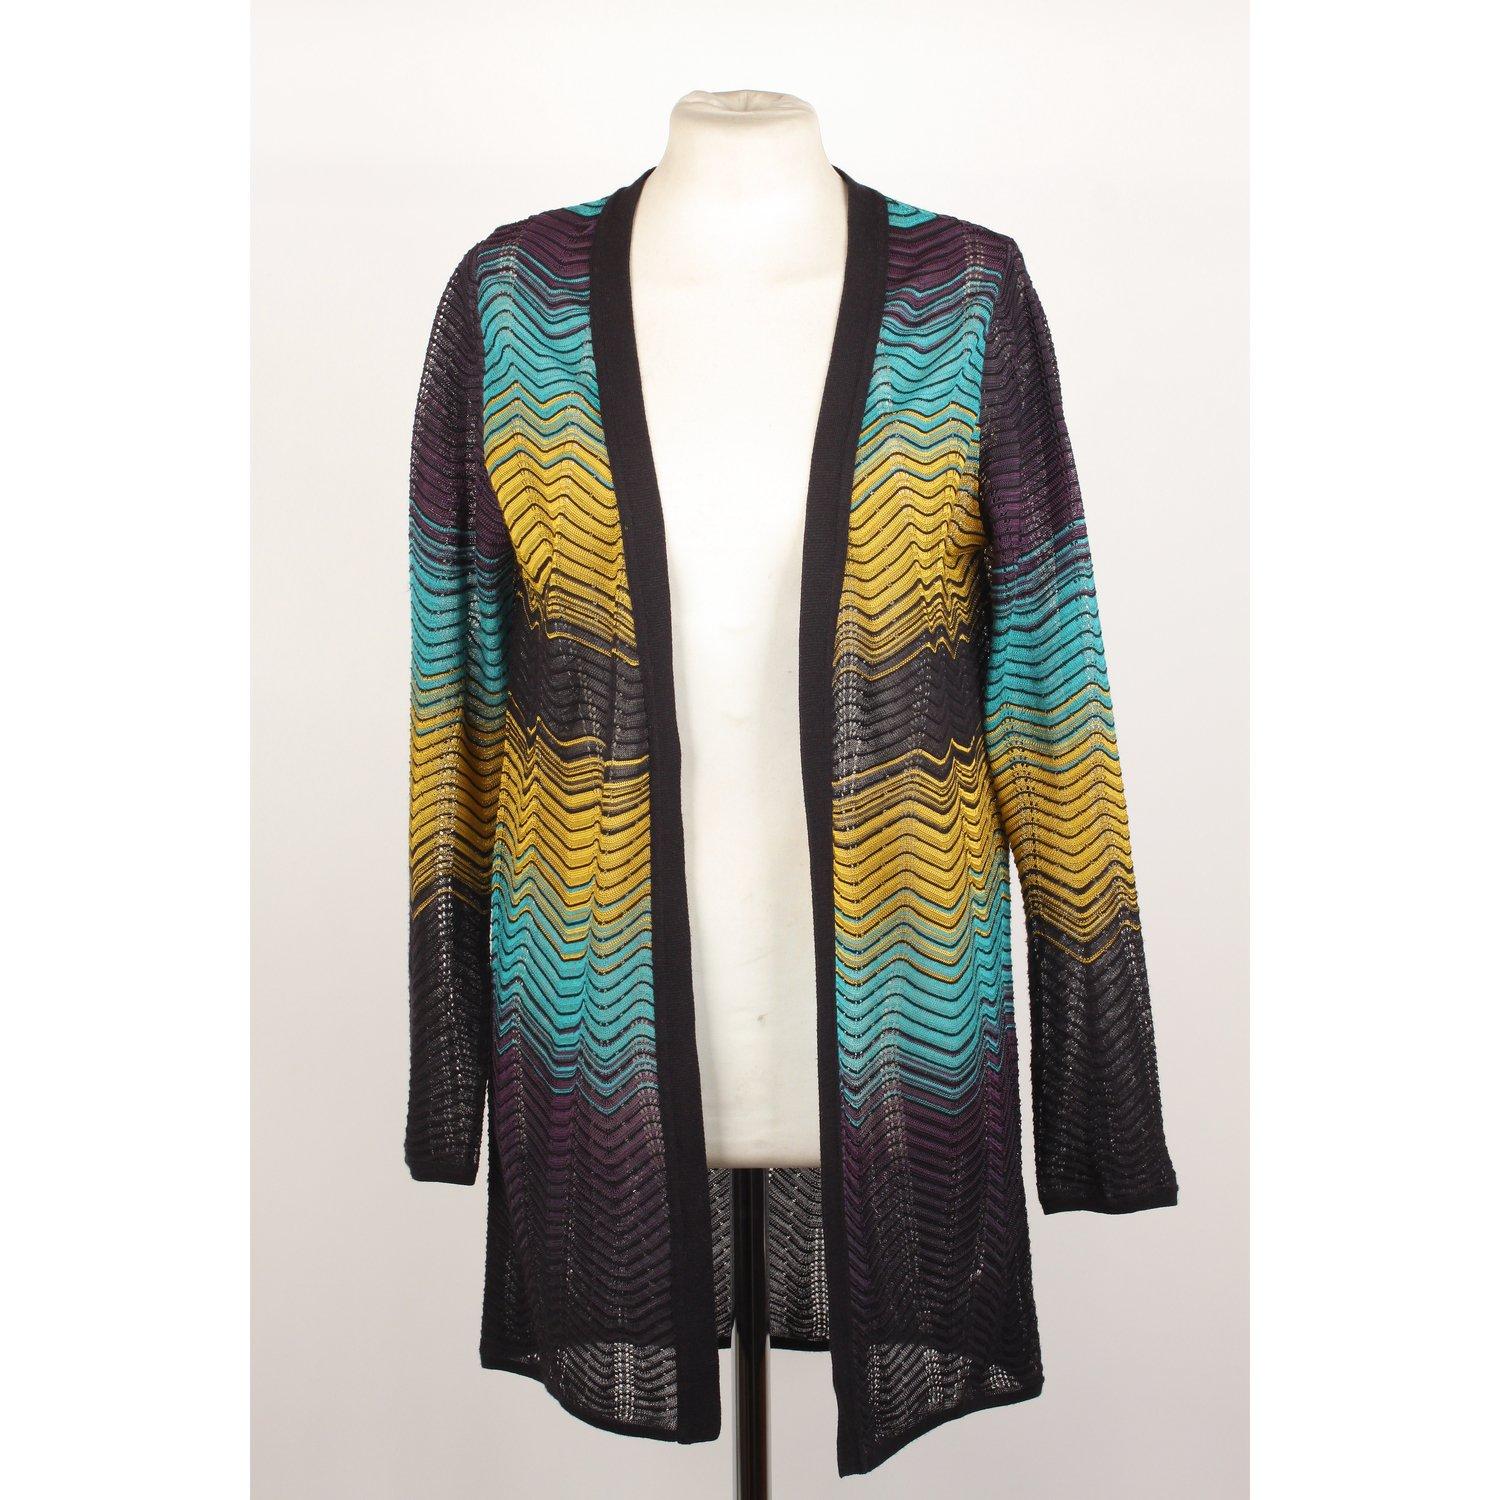 MATERIAL: Viscose Blend COLOR: Multicolor MODEL: Cardigan GENDER: Women SIZE: Small COUNTRY OF MANUFACTURE: Condition CONDITION DETAILS: A :EXCELLENT CONDITION - Used once or twice. Looks mint. Imperceptible signs of wear may be present due to